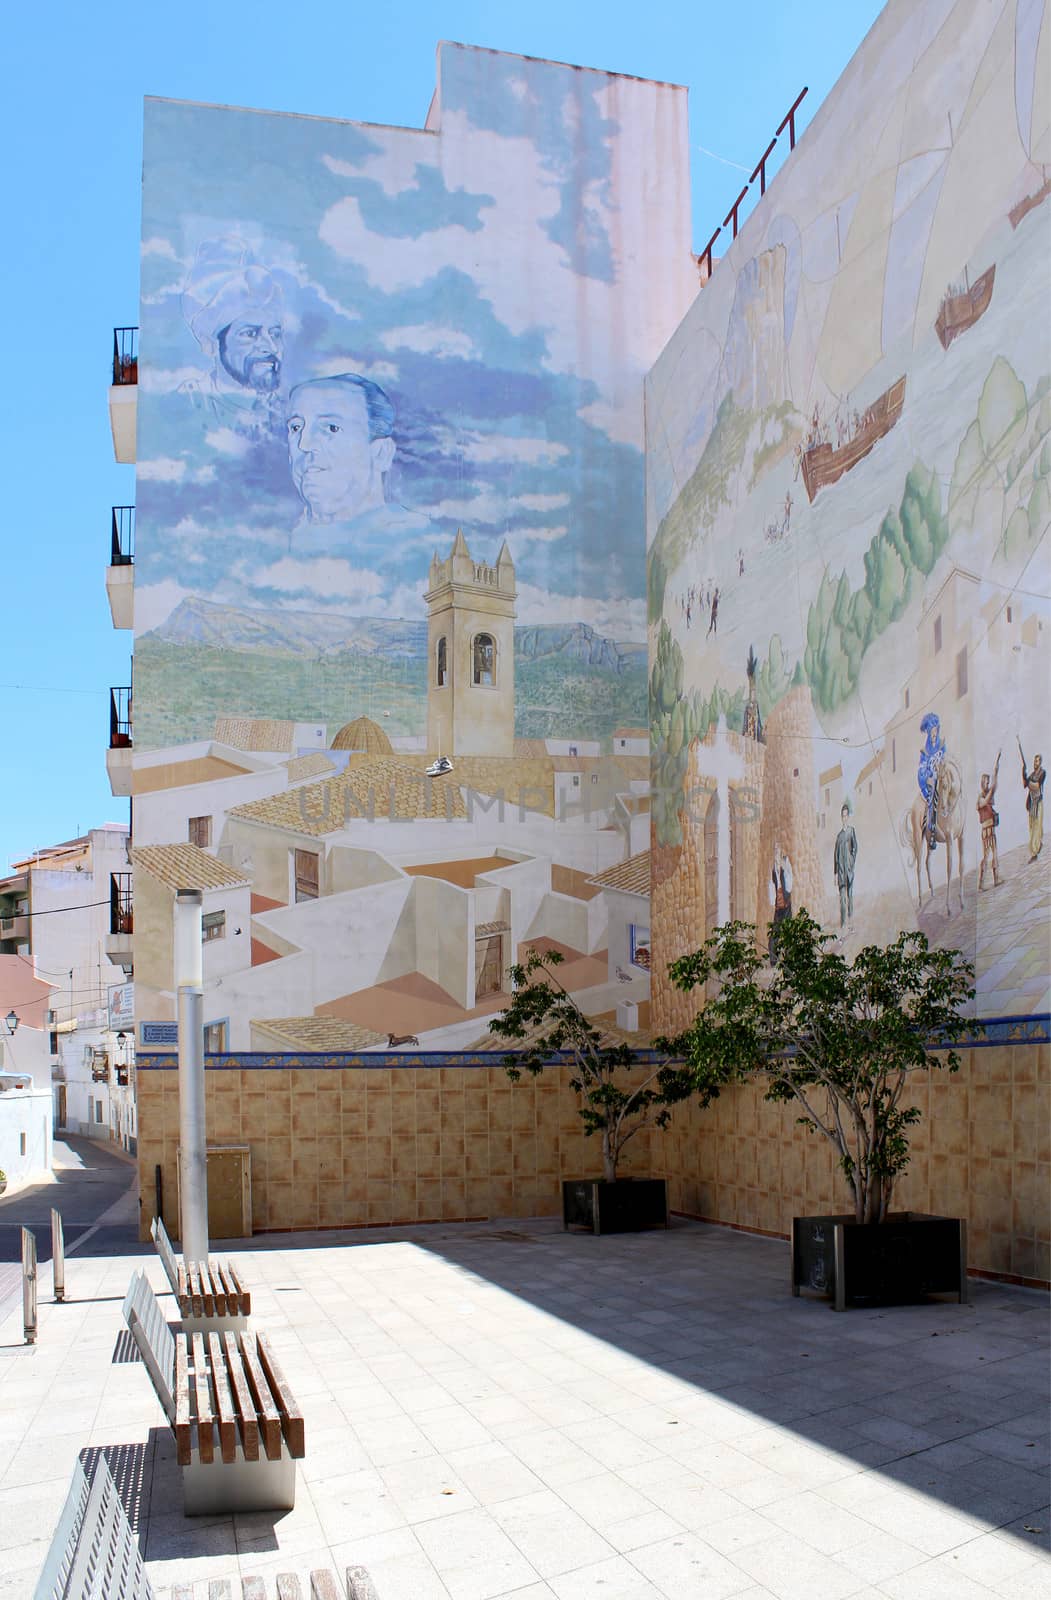 Painted Mural at Plaza D. Manuel Miro by ptxgarfield